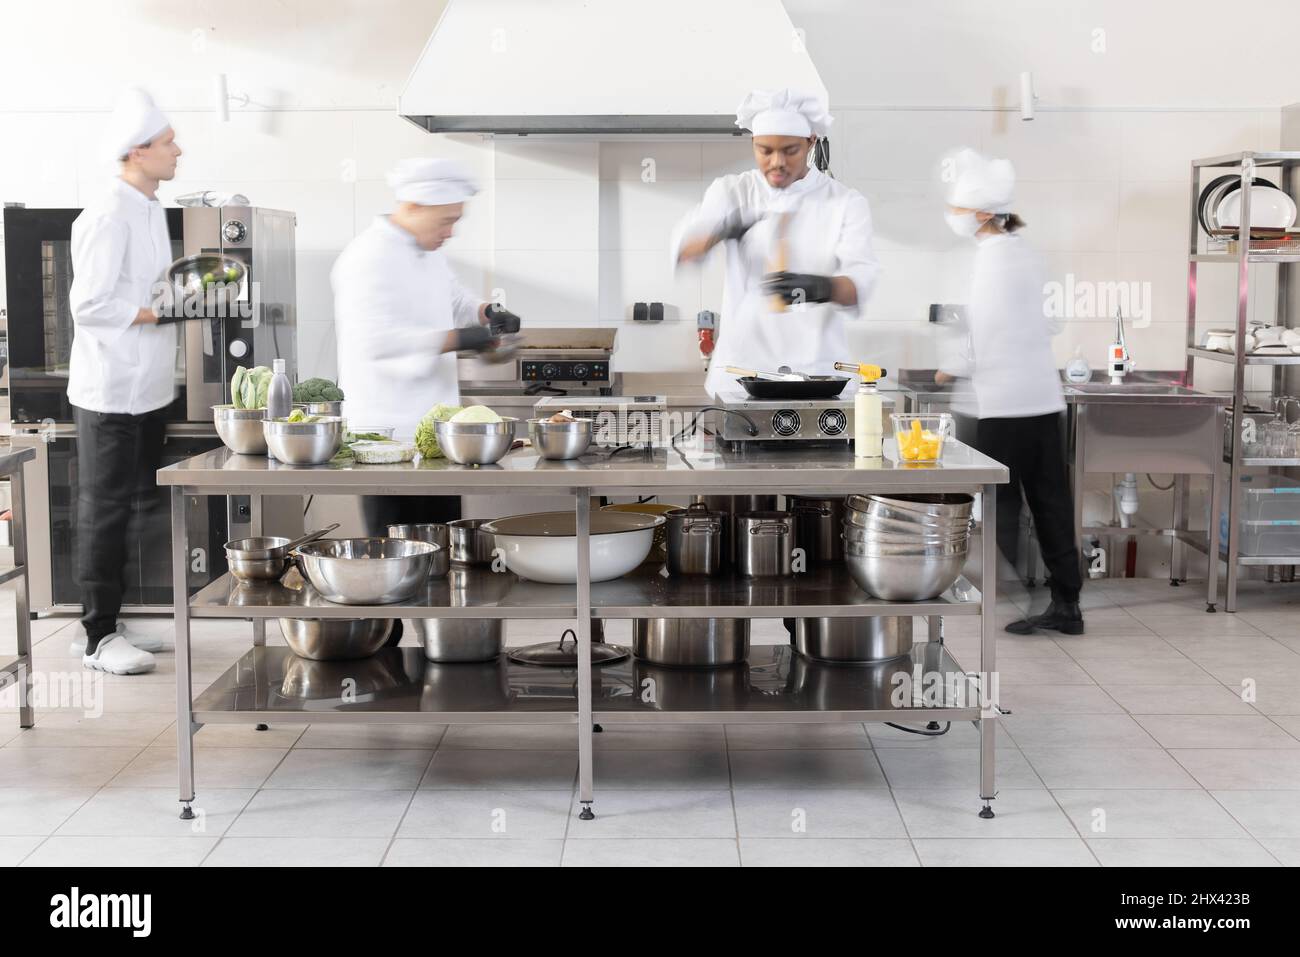 https://c8.alamy.com/comp/2HX423B/chef-cooks-working-in-professional-kitchen-chefs-hurry-up-actively-cooking-meals-for-restaurant-long-exposure-with-motion-blurred-figures-2HX423B.jpg